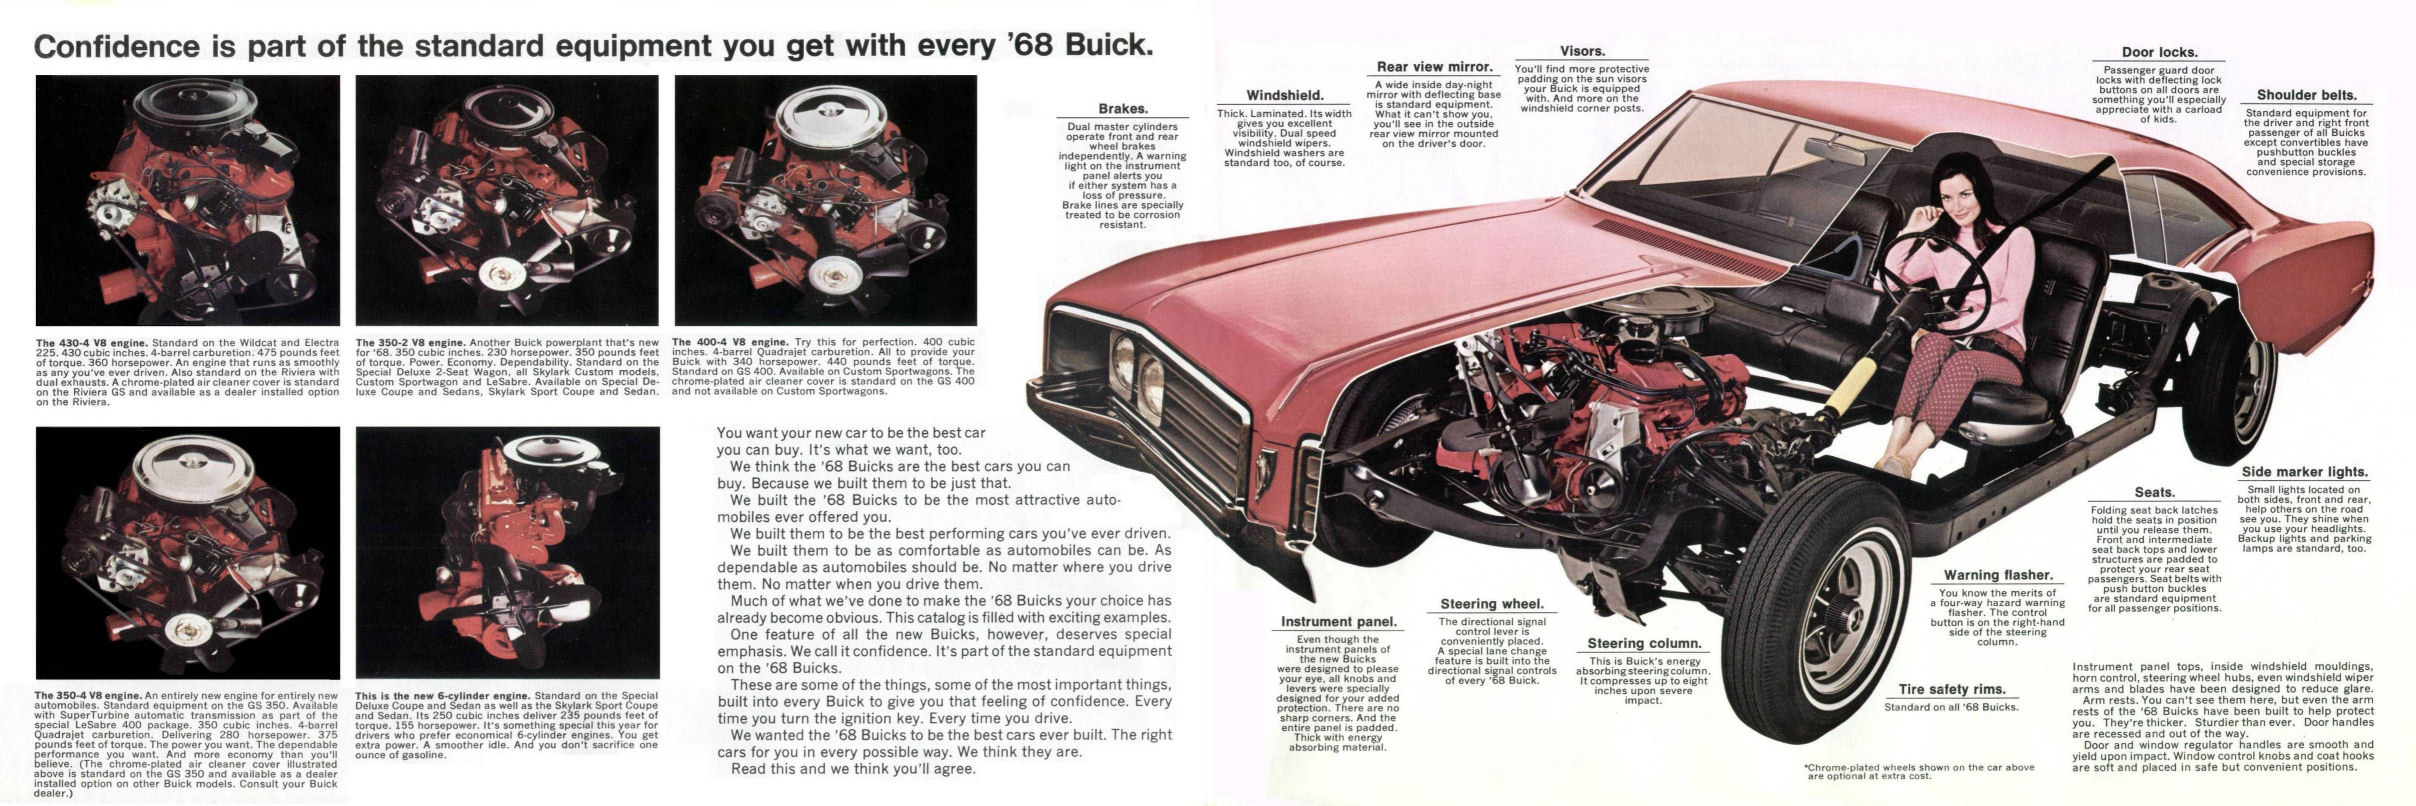 1968 Buick-a10